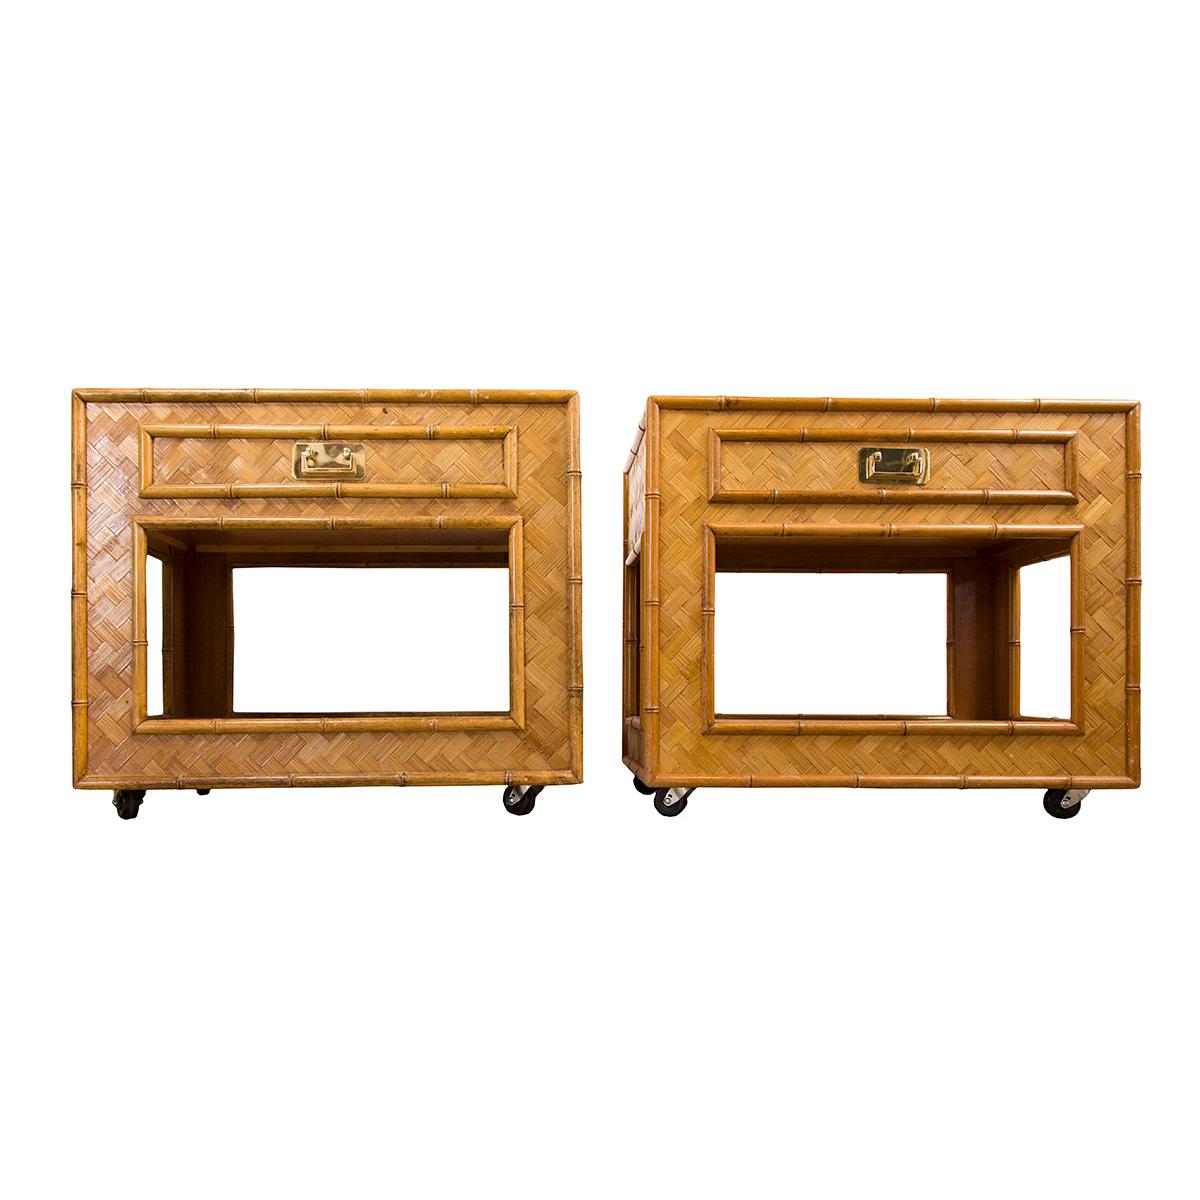 Pair of Woven Rattan Cabinets with Single Drawer, Bottom Shelf on Casters